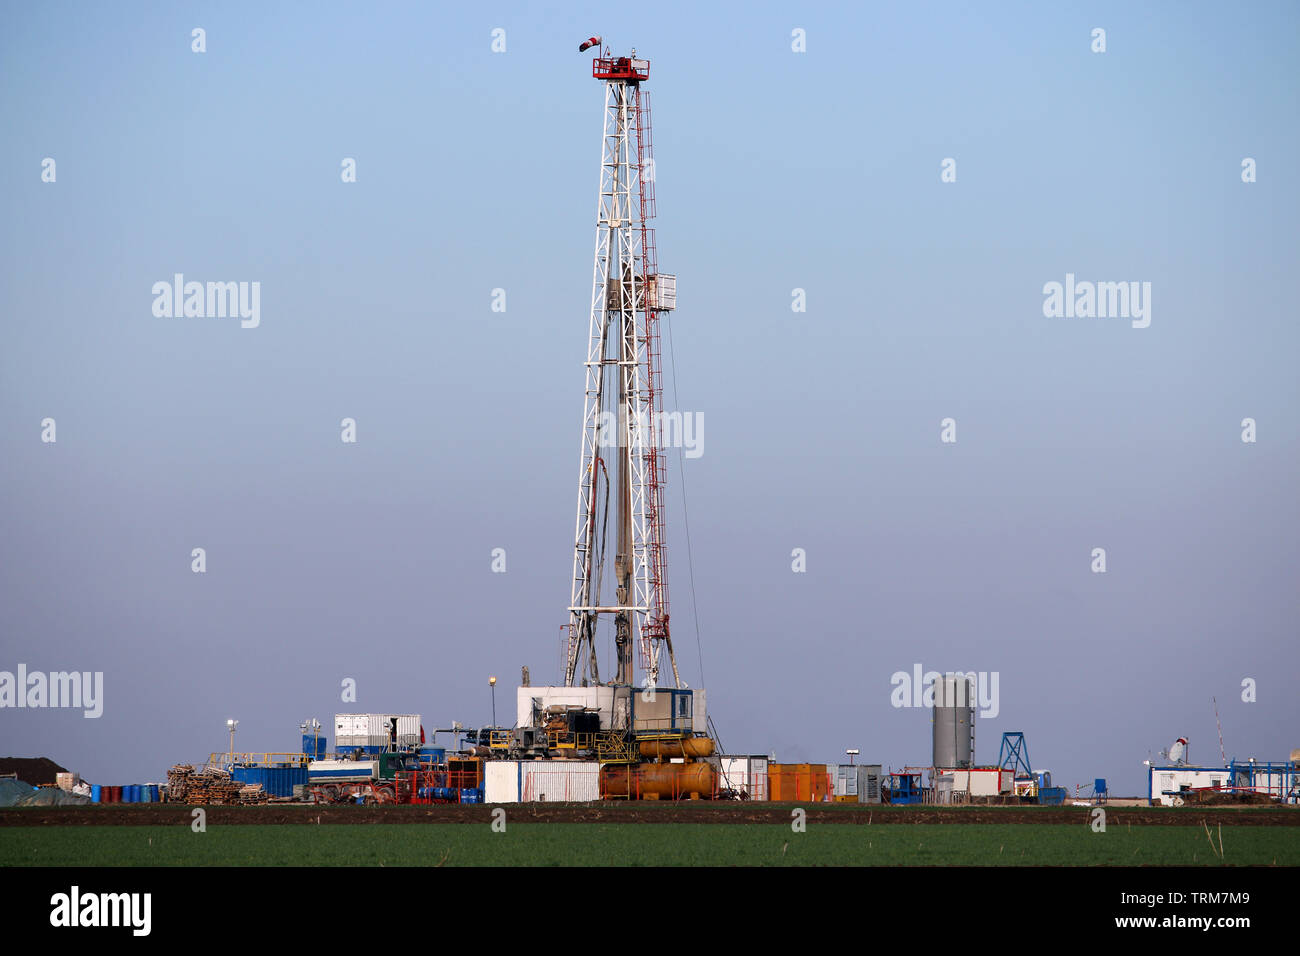 Oil and gas drilling rig in oilfield industry Stock Photo